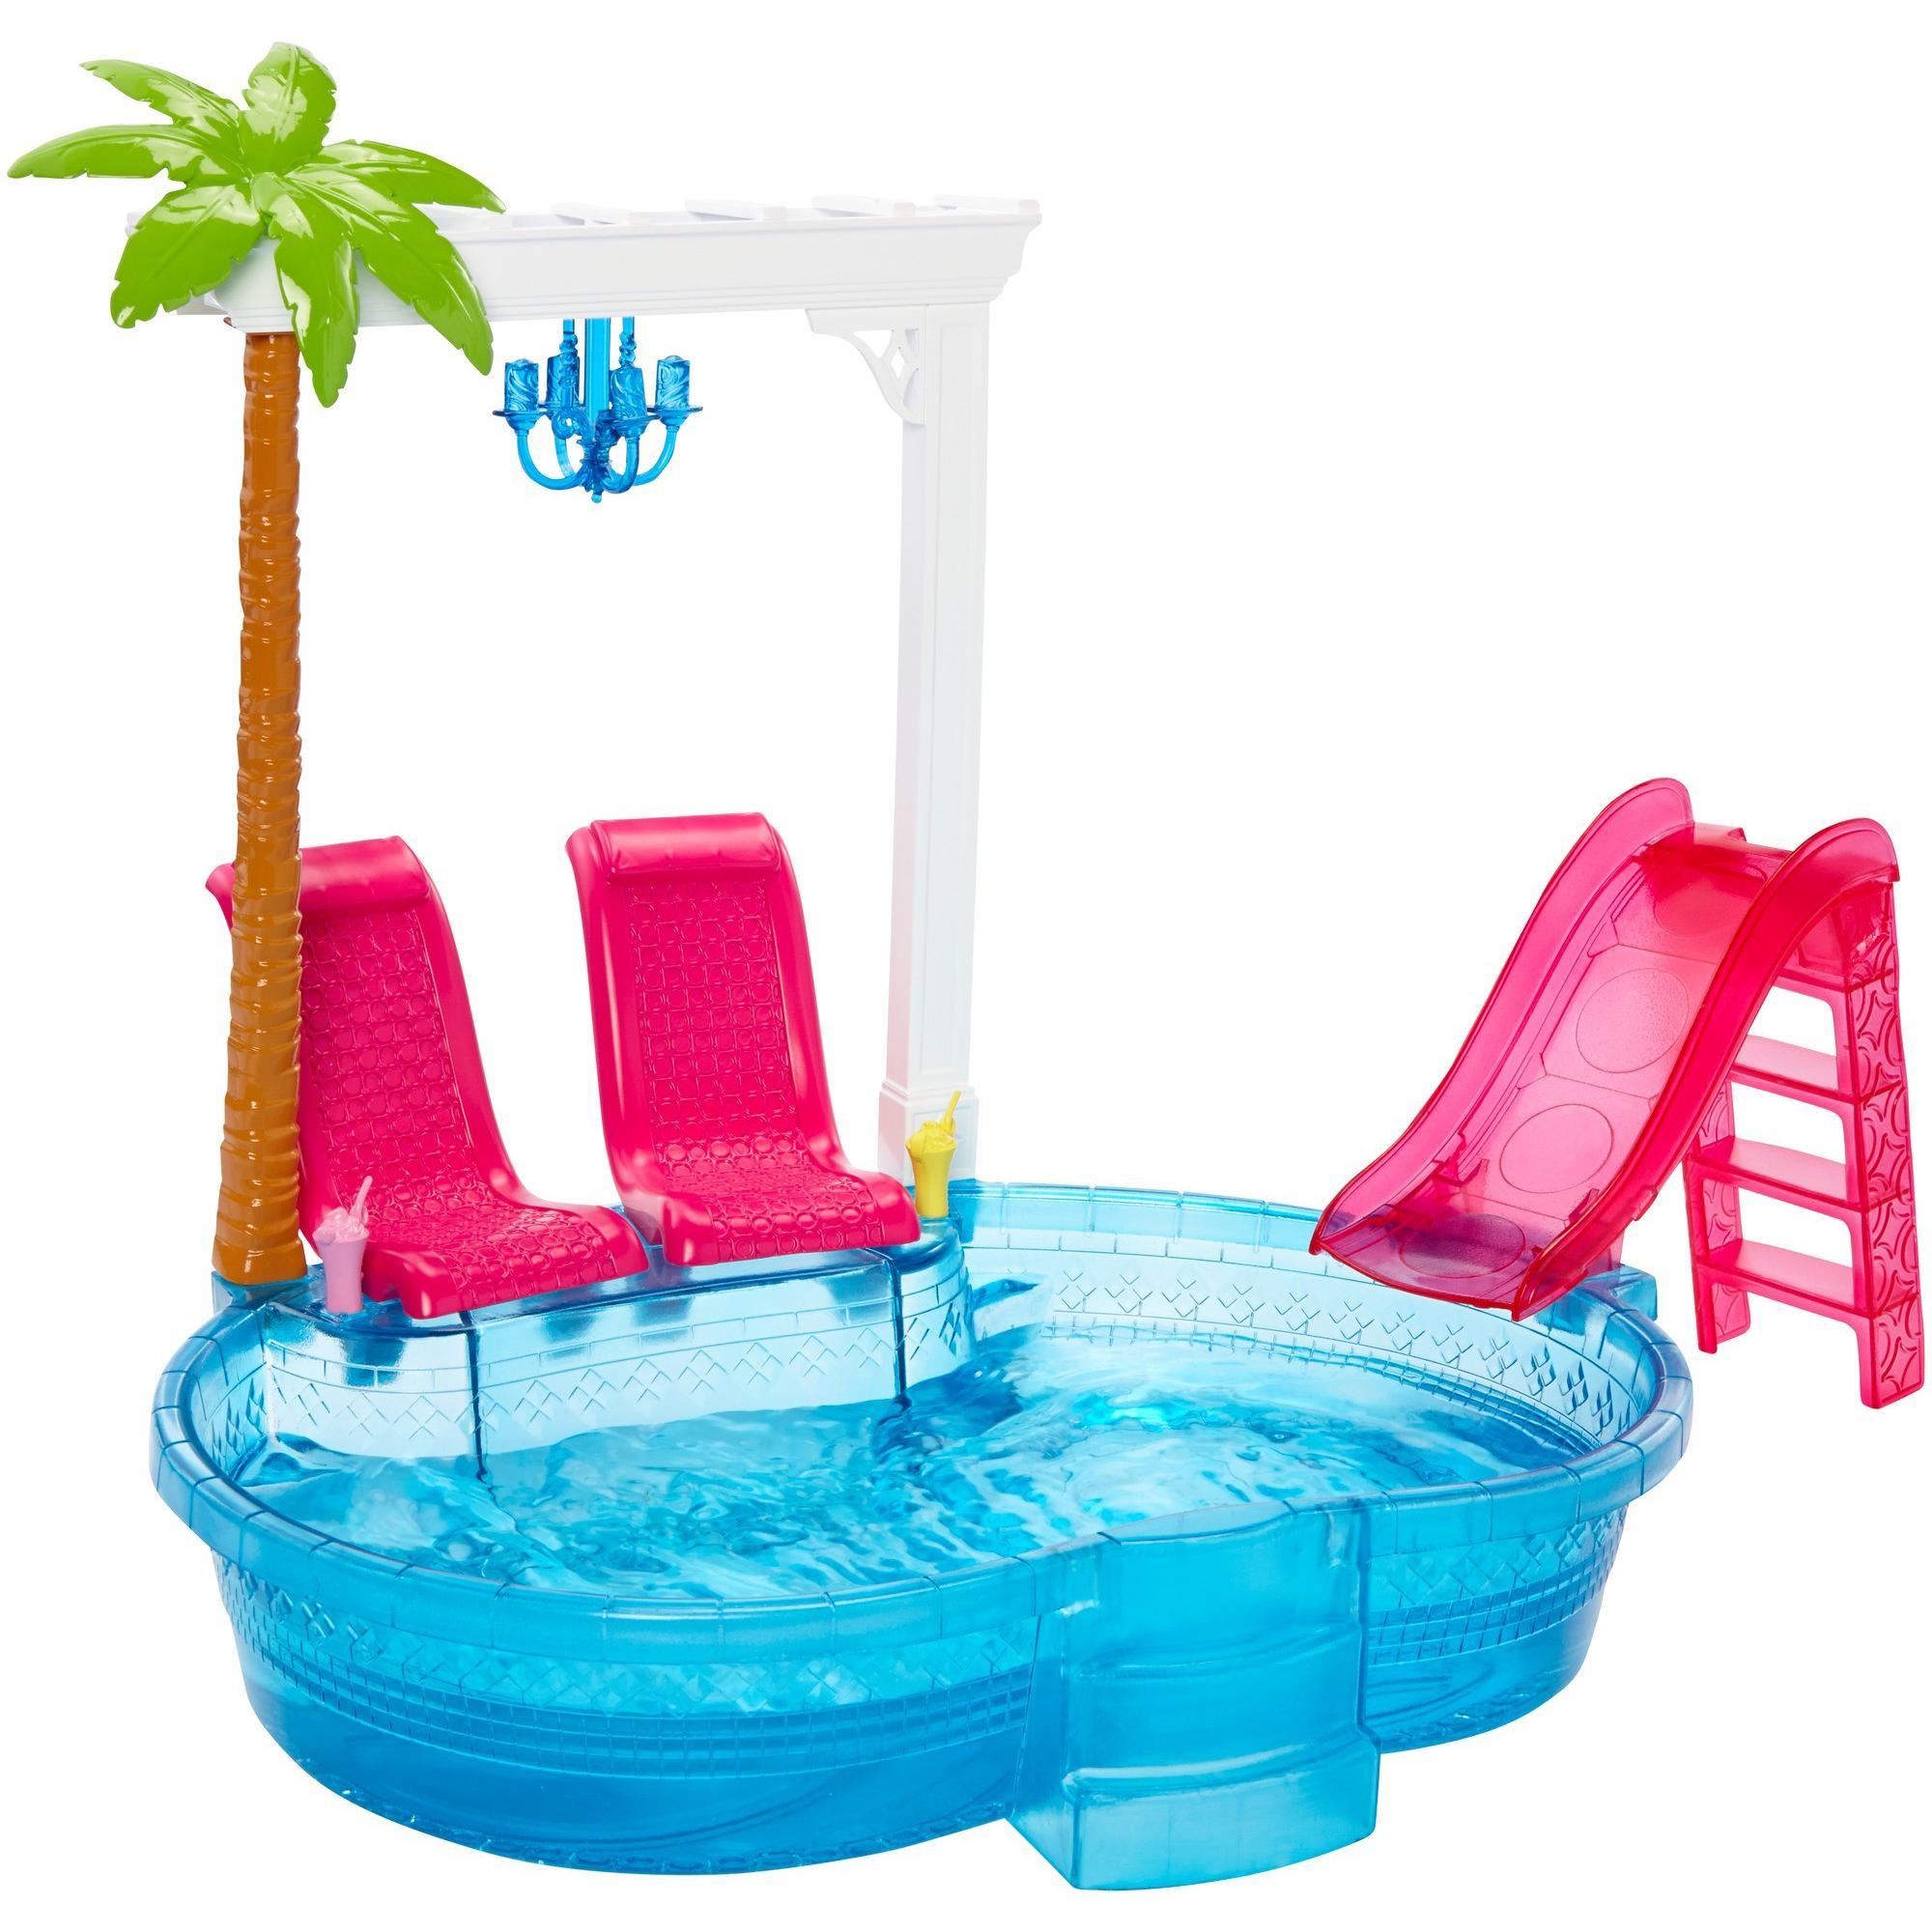 Barbie Glam Pool Party Playset with Themed-Accessories - image 1 of 5